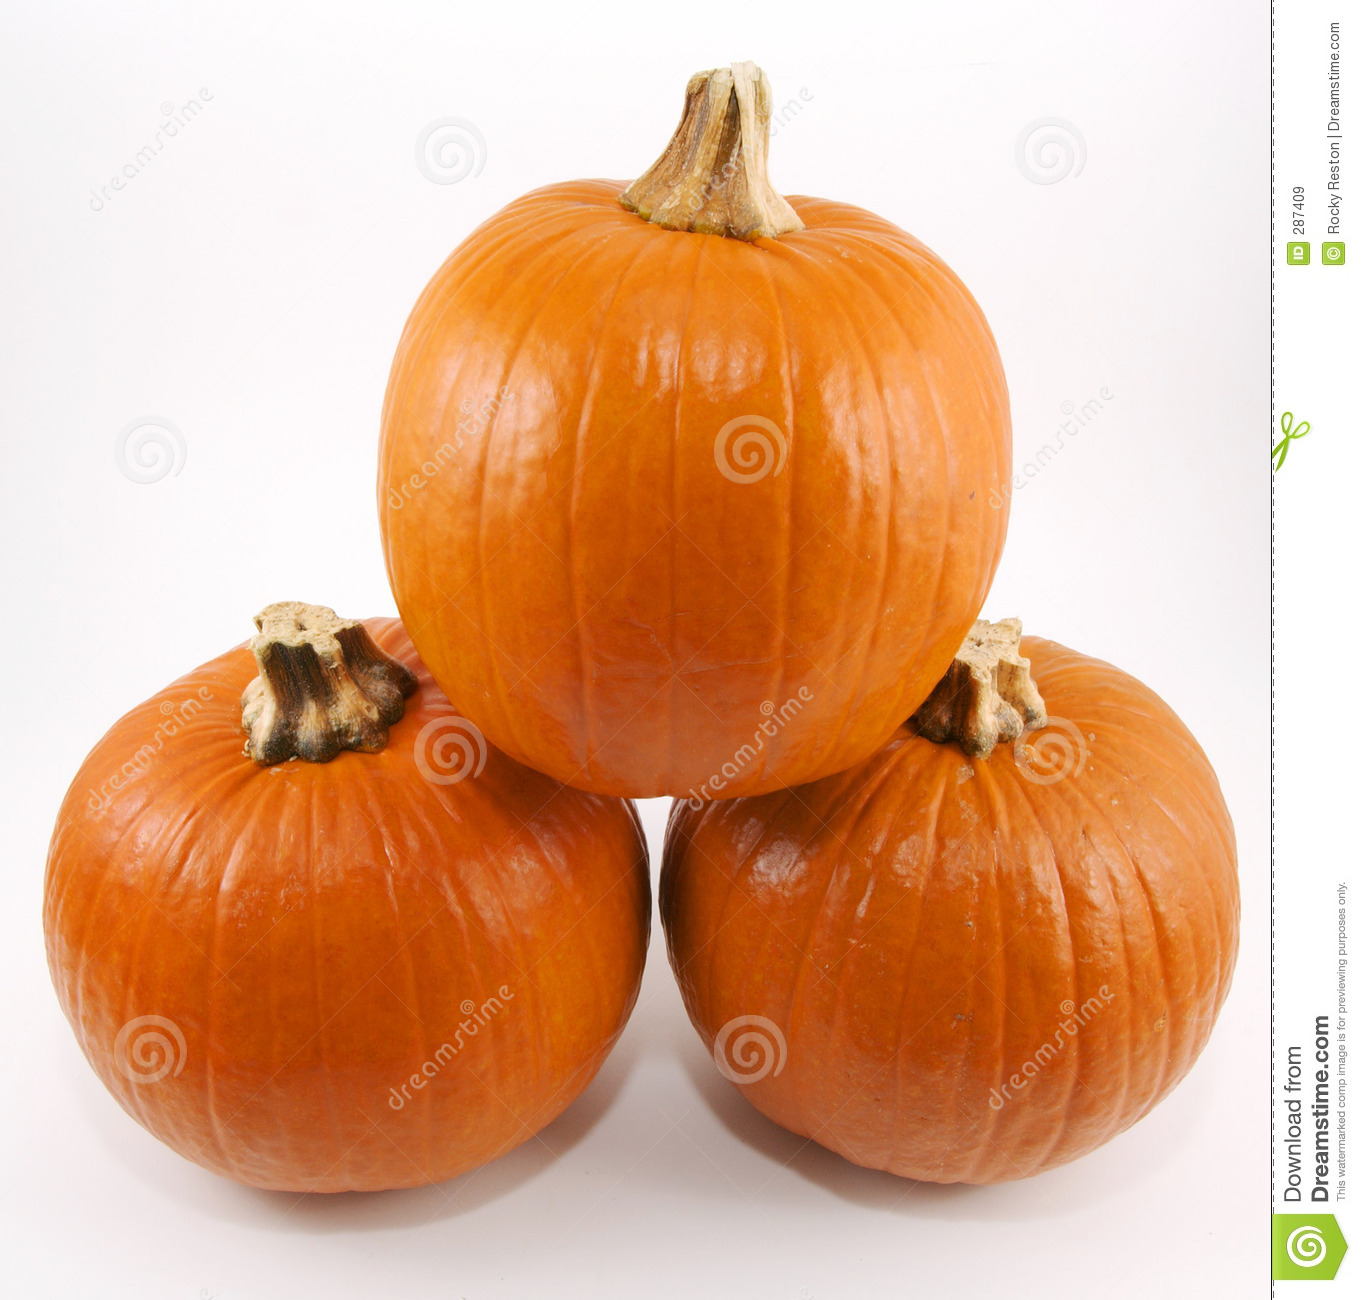 High Resolution View Of Three Pumpkins Stacked Isolated On A White